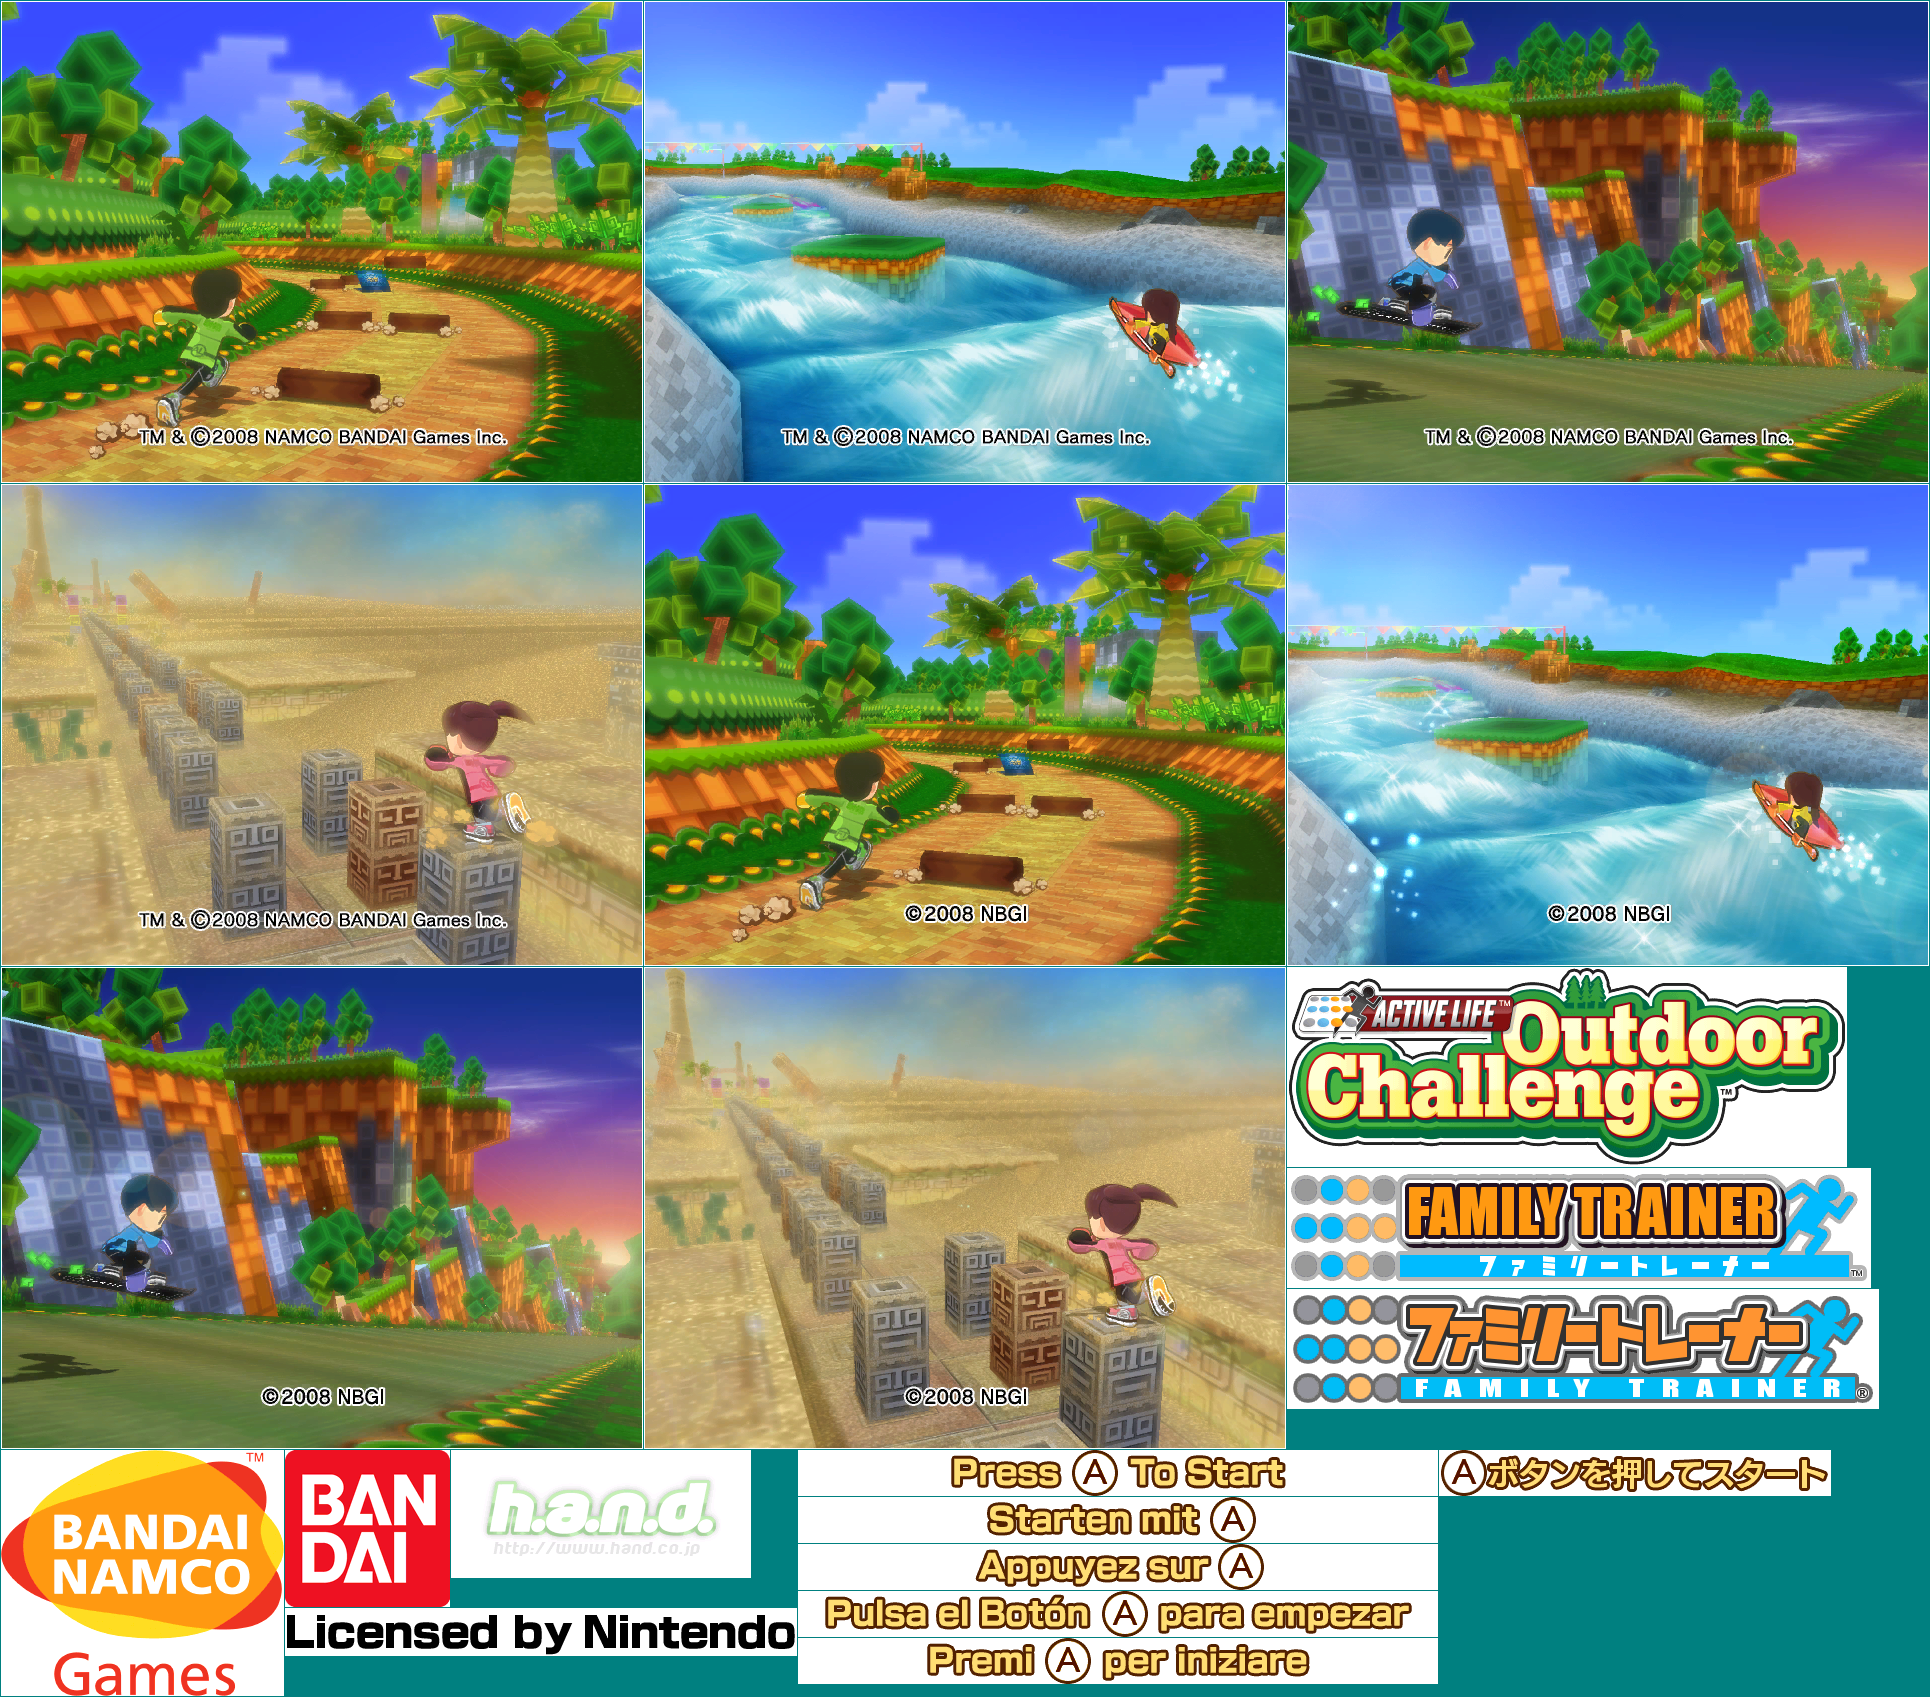 Active Life: Outdoor Challenge / Family Trainer - Title Screen